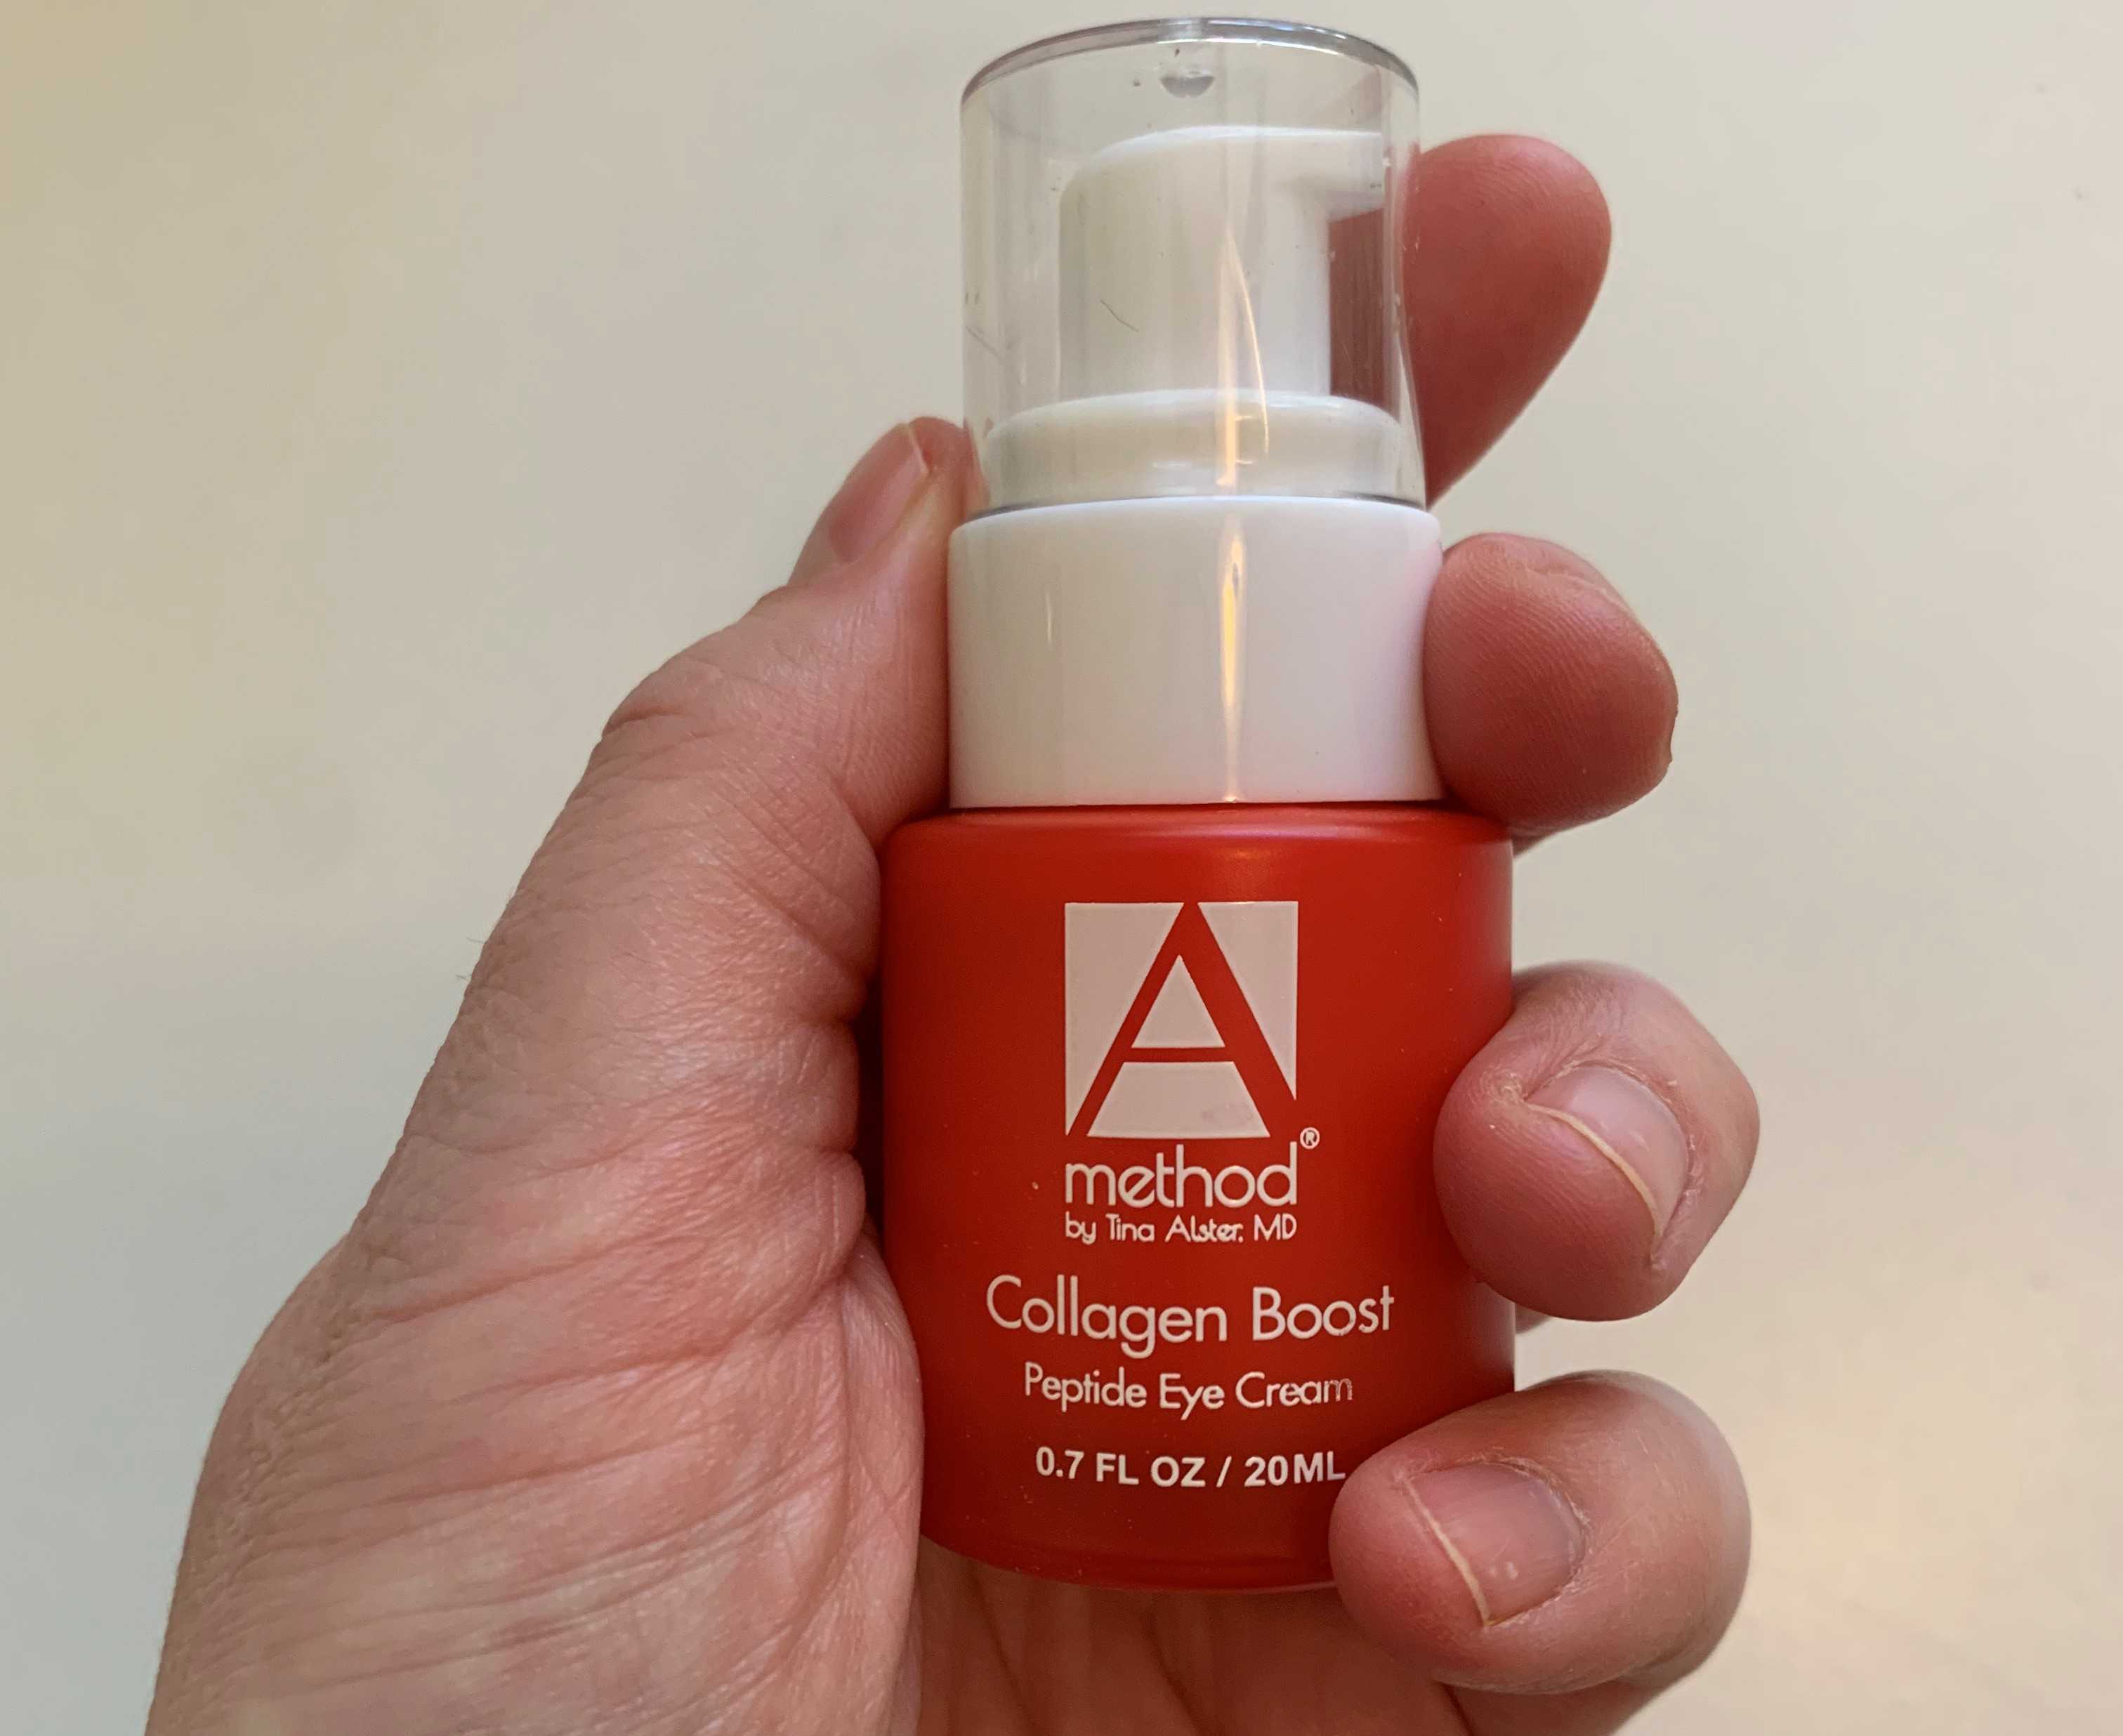 Collagen Boost peptide eye cream by Tina Alster MD